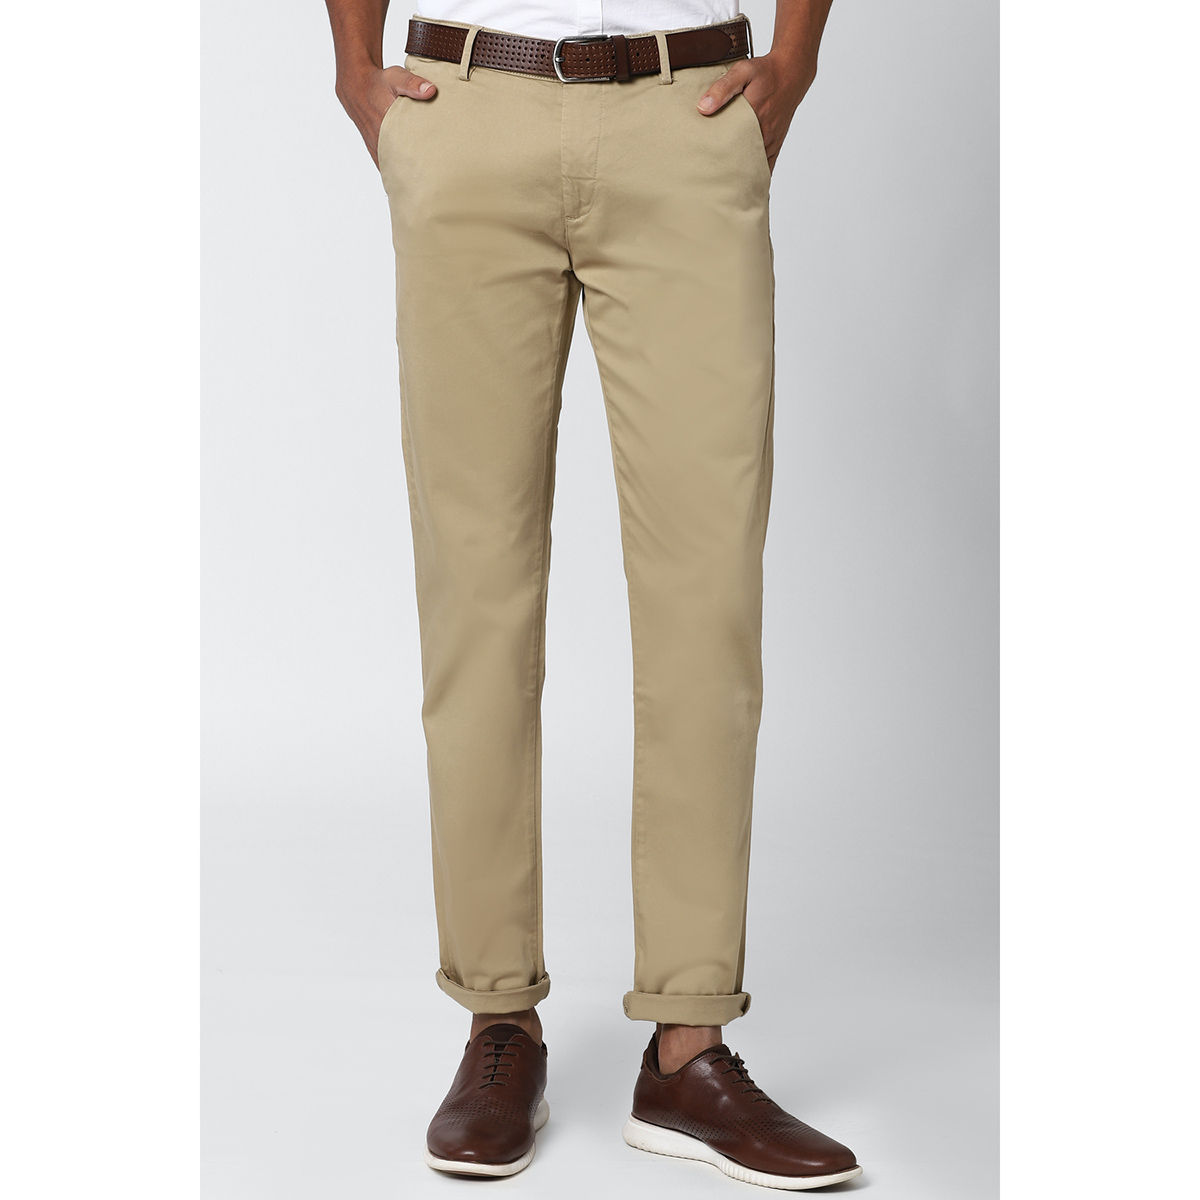 Louis Philippe Sport Mens Slim Fit Casual Trousers LYTF1S01463Khaki32   Amazonin Clothing  Accessories